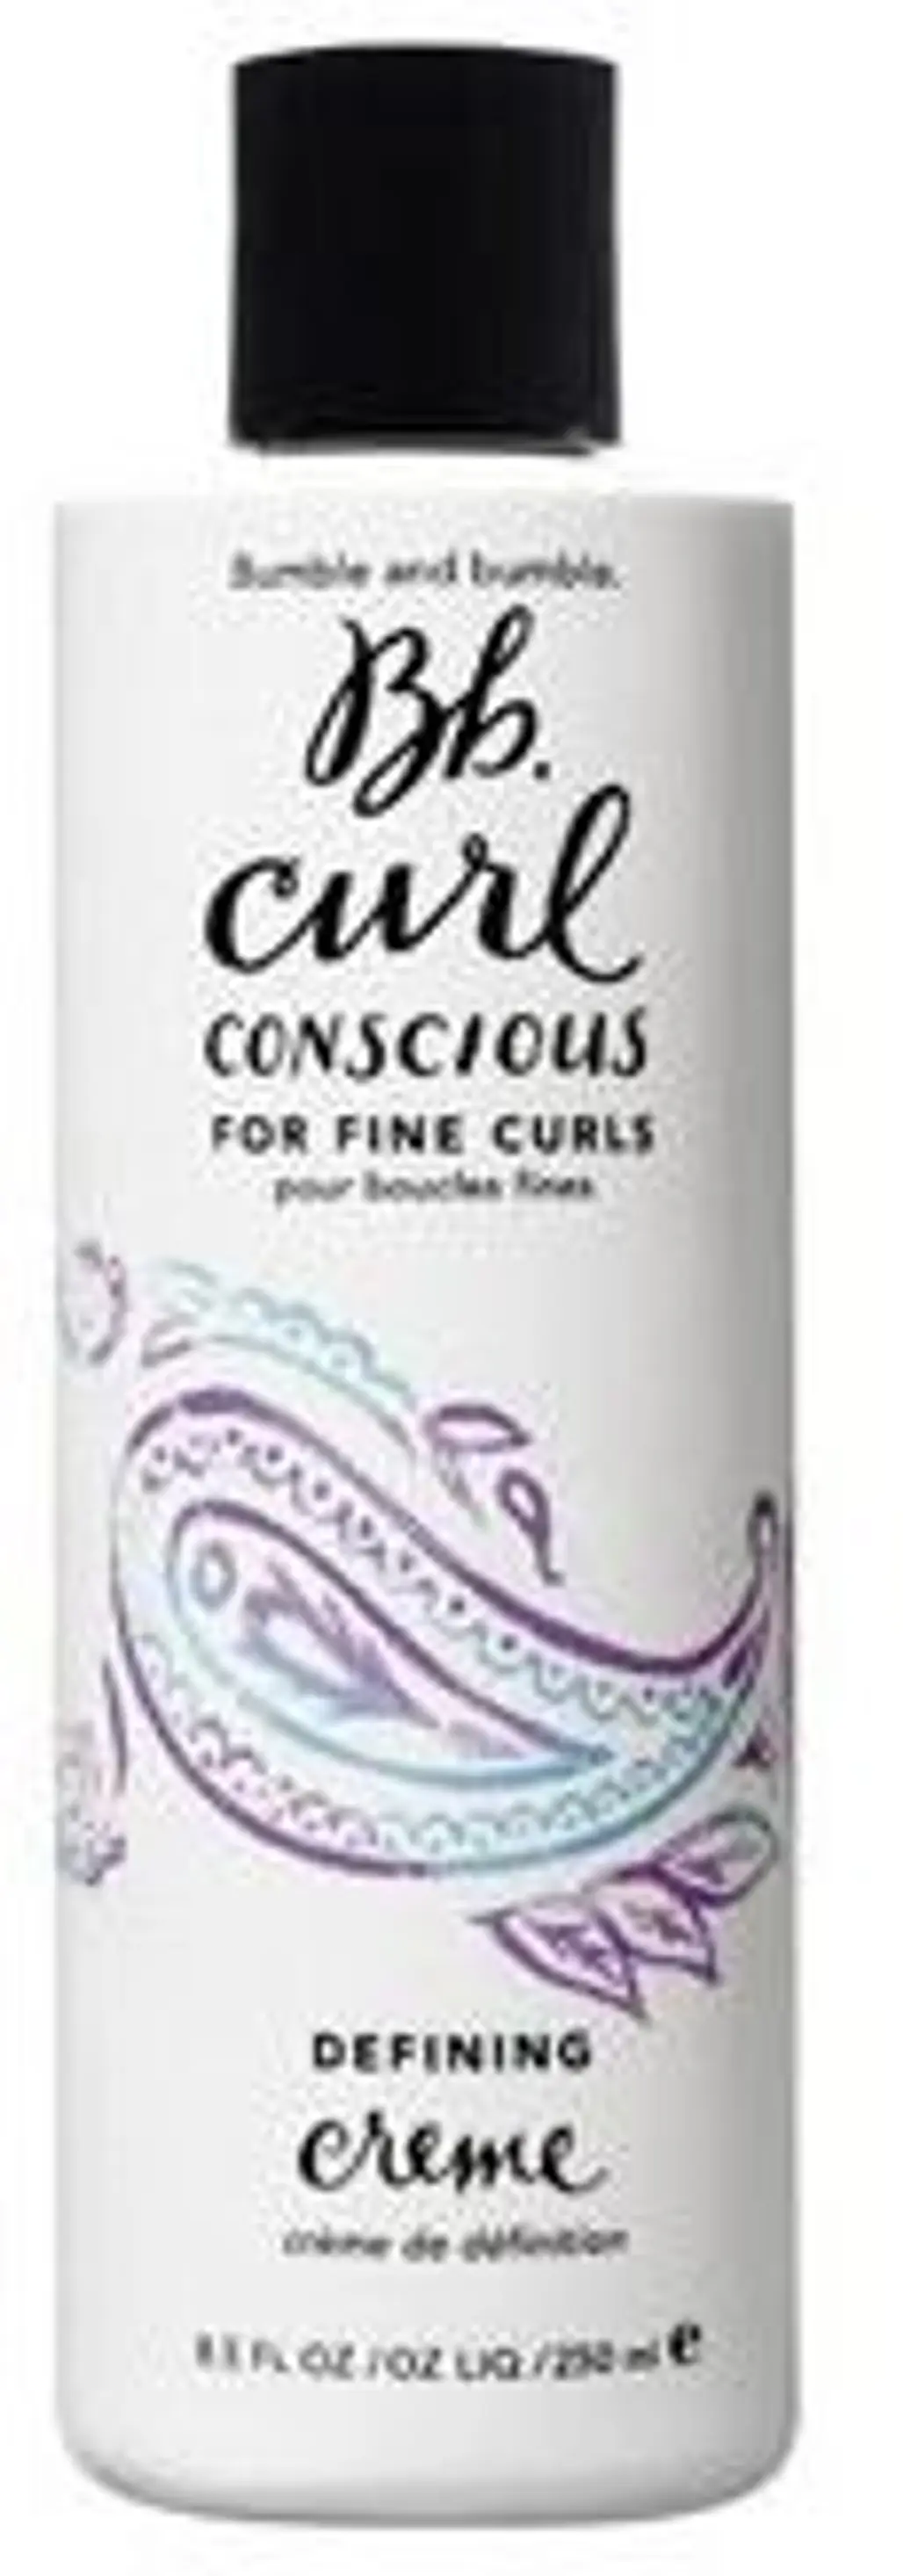 Bumble and Bumble Curl Conscious Defining Cream